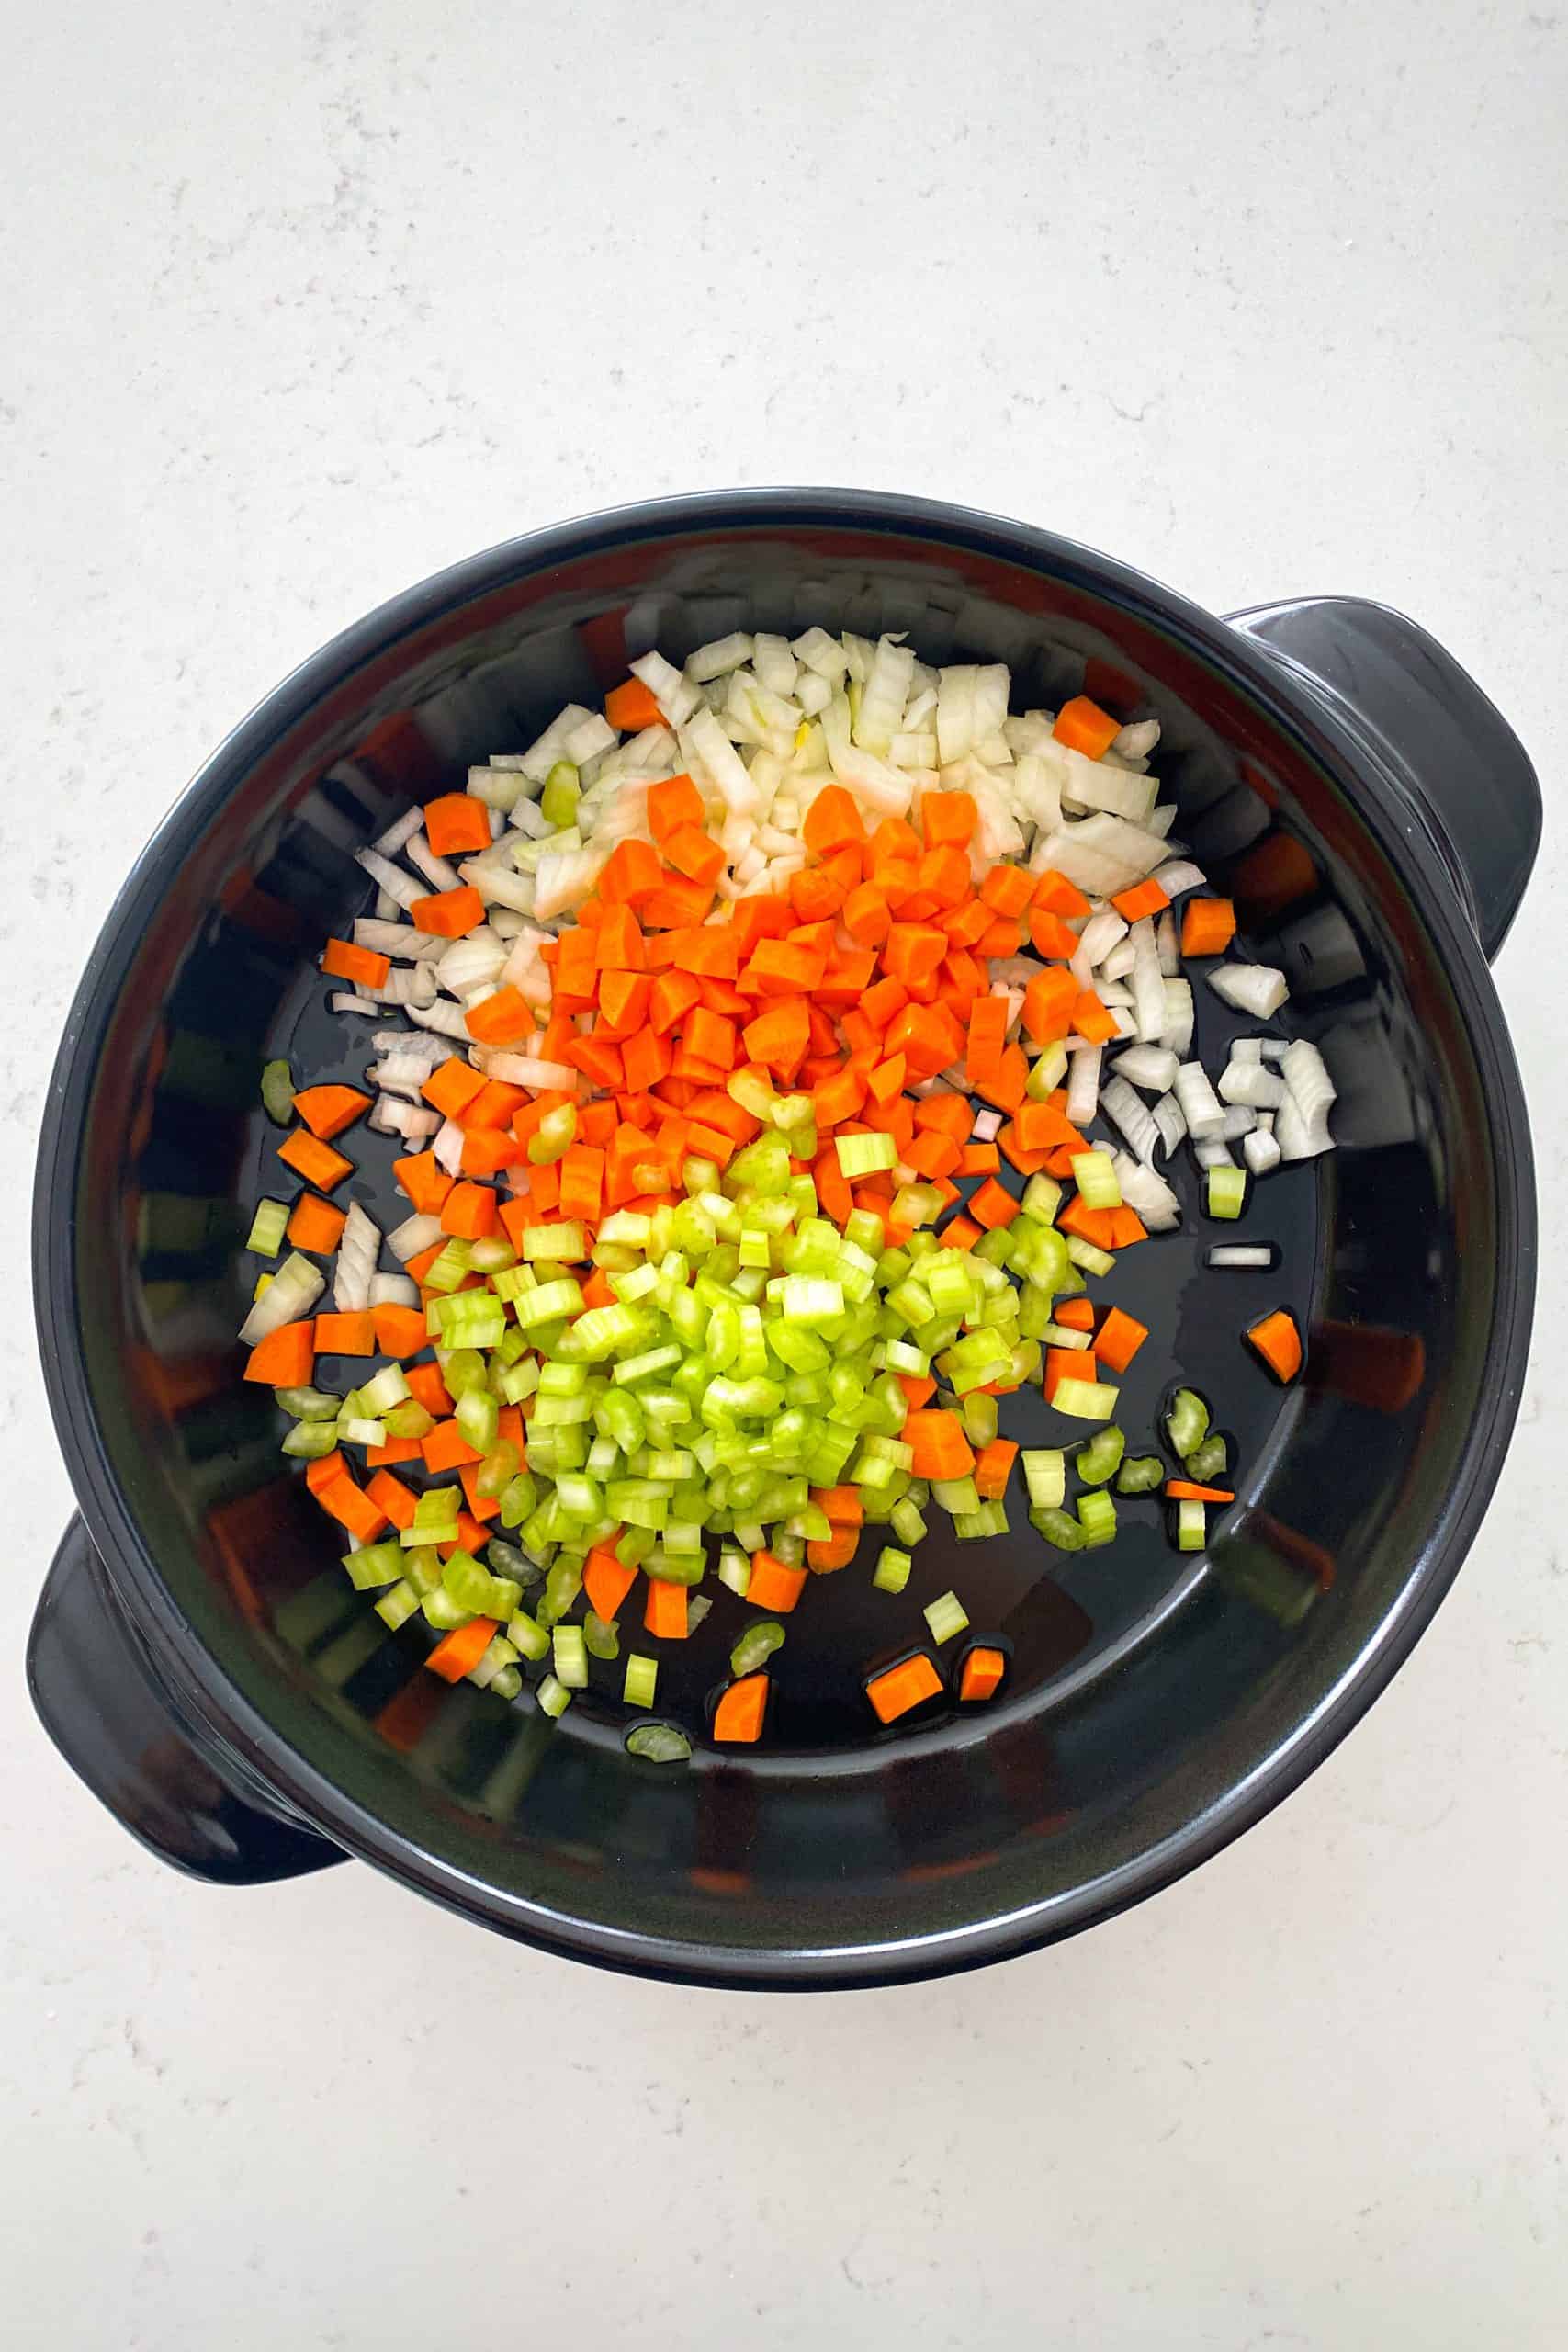 Xtrema versa pan with chopped onion, carrot and celery inside.